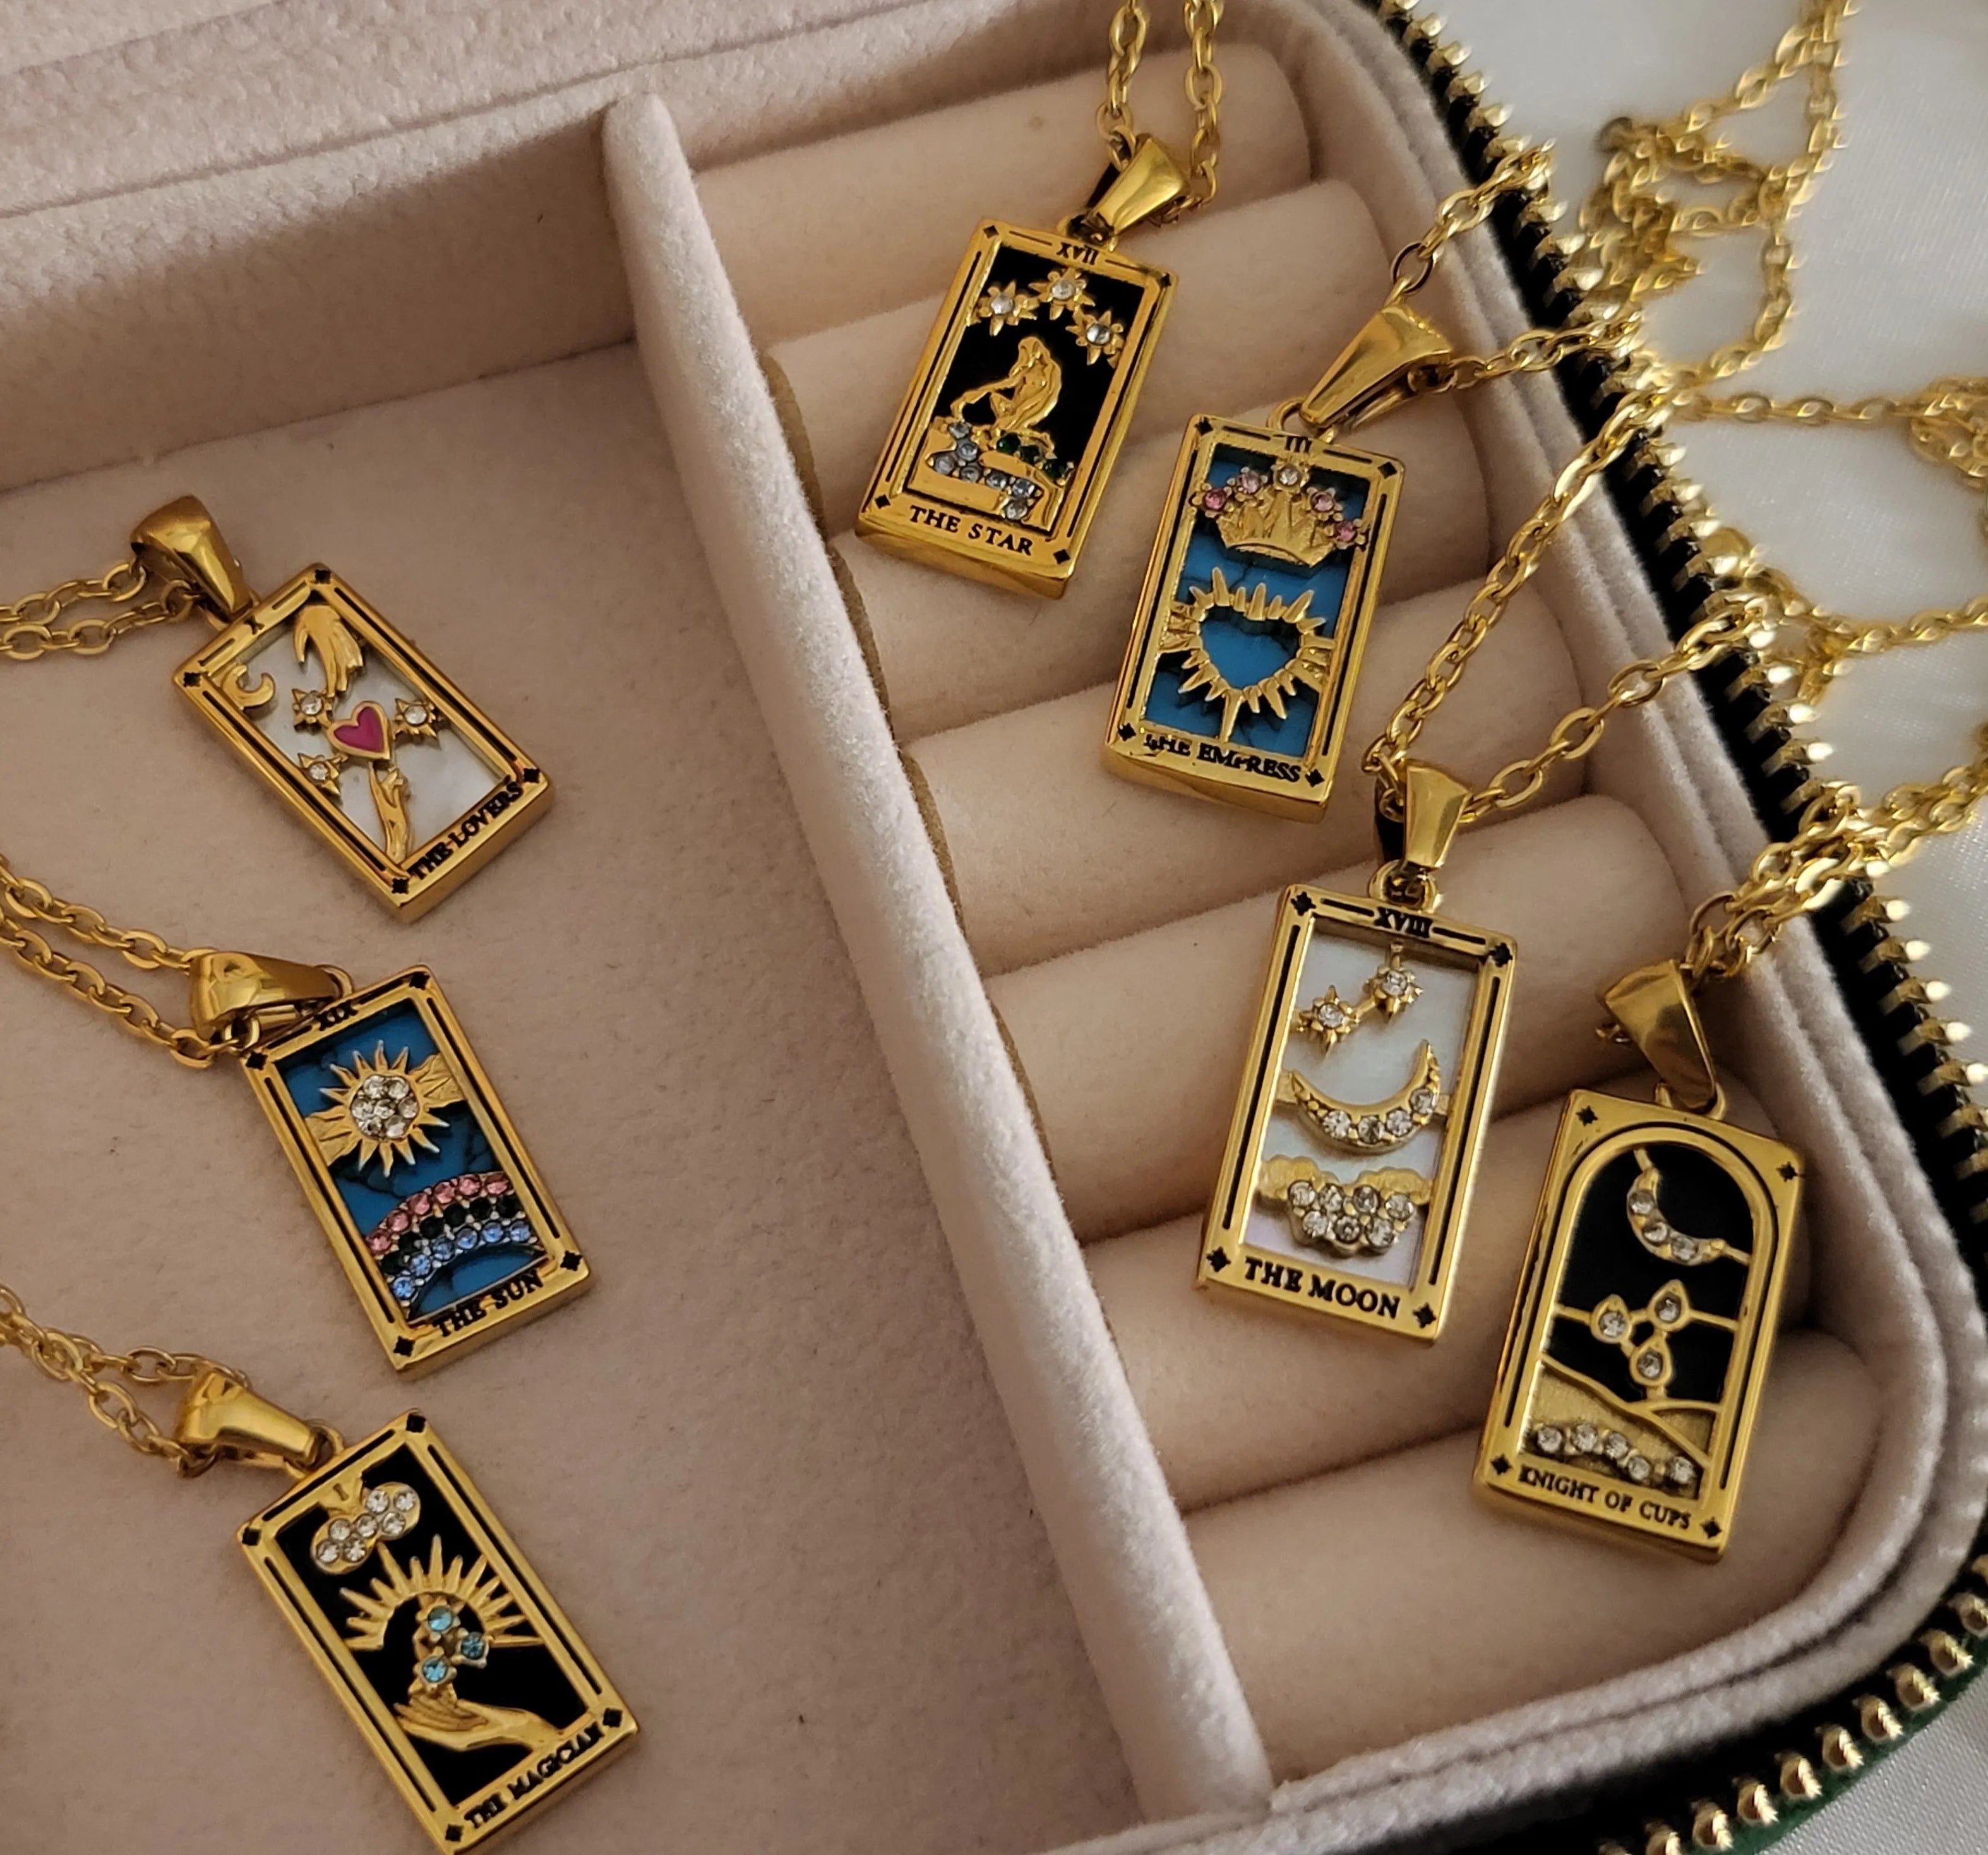 Gold Filled Tarot Necklace product images.